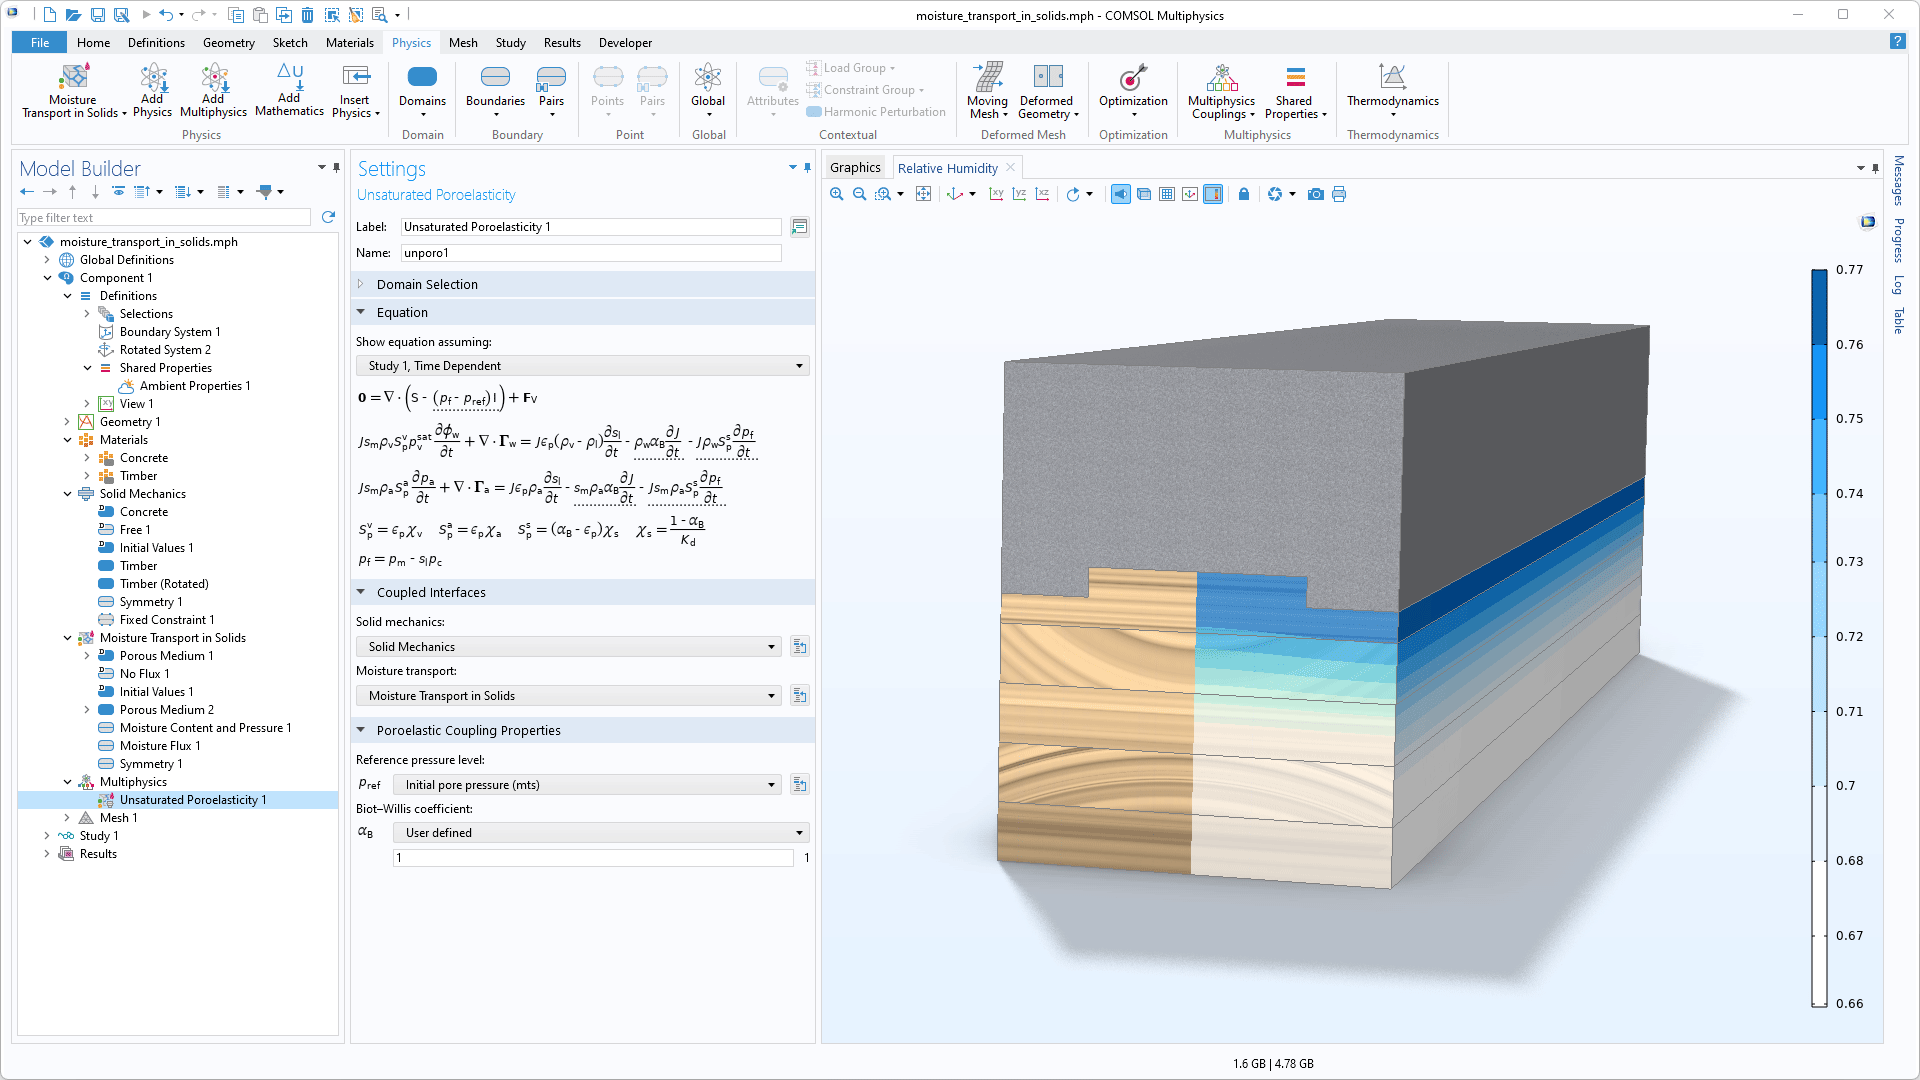 The COMSOL Multiphysics UI showing the Model Builder with the Unsaturated Poroelasticity node highlighted, the corresponding Settings window, and a timber–concrete model in the Graphics window.